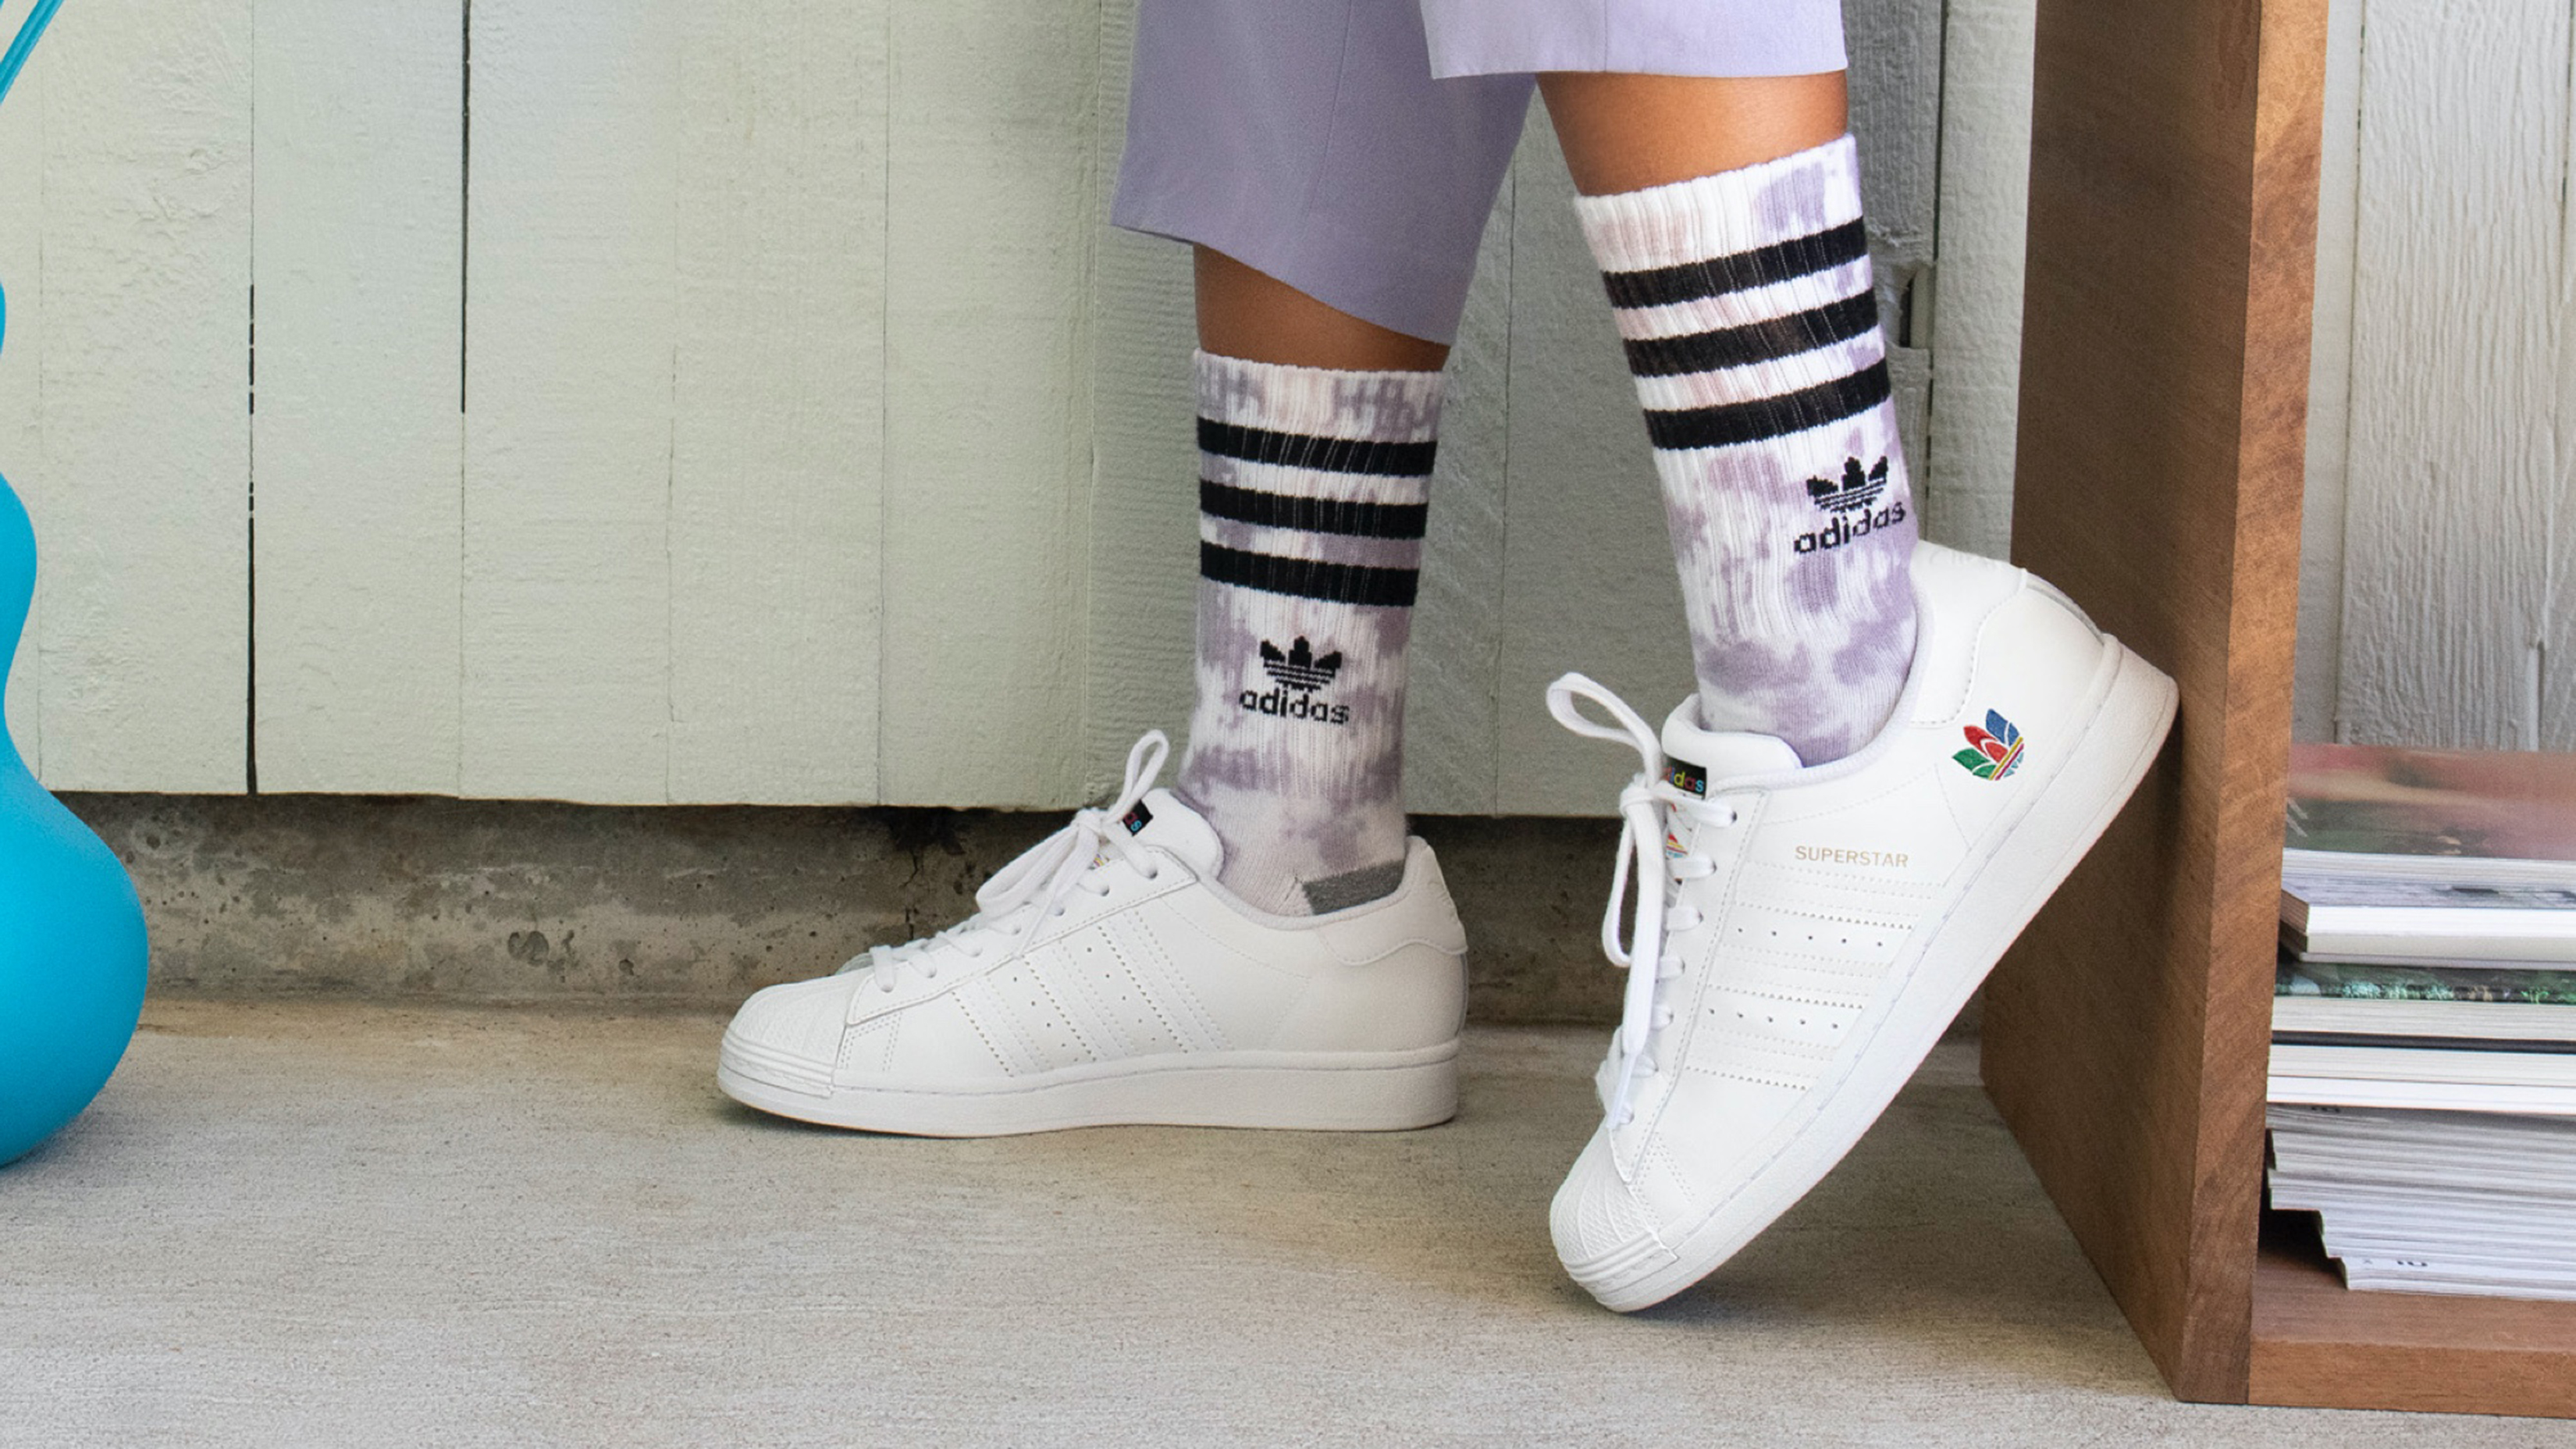 The adidas Superstar rocks new looks to celebrate 50 years | CNN ...